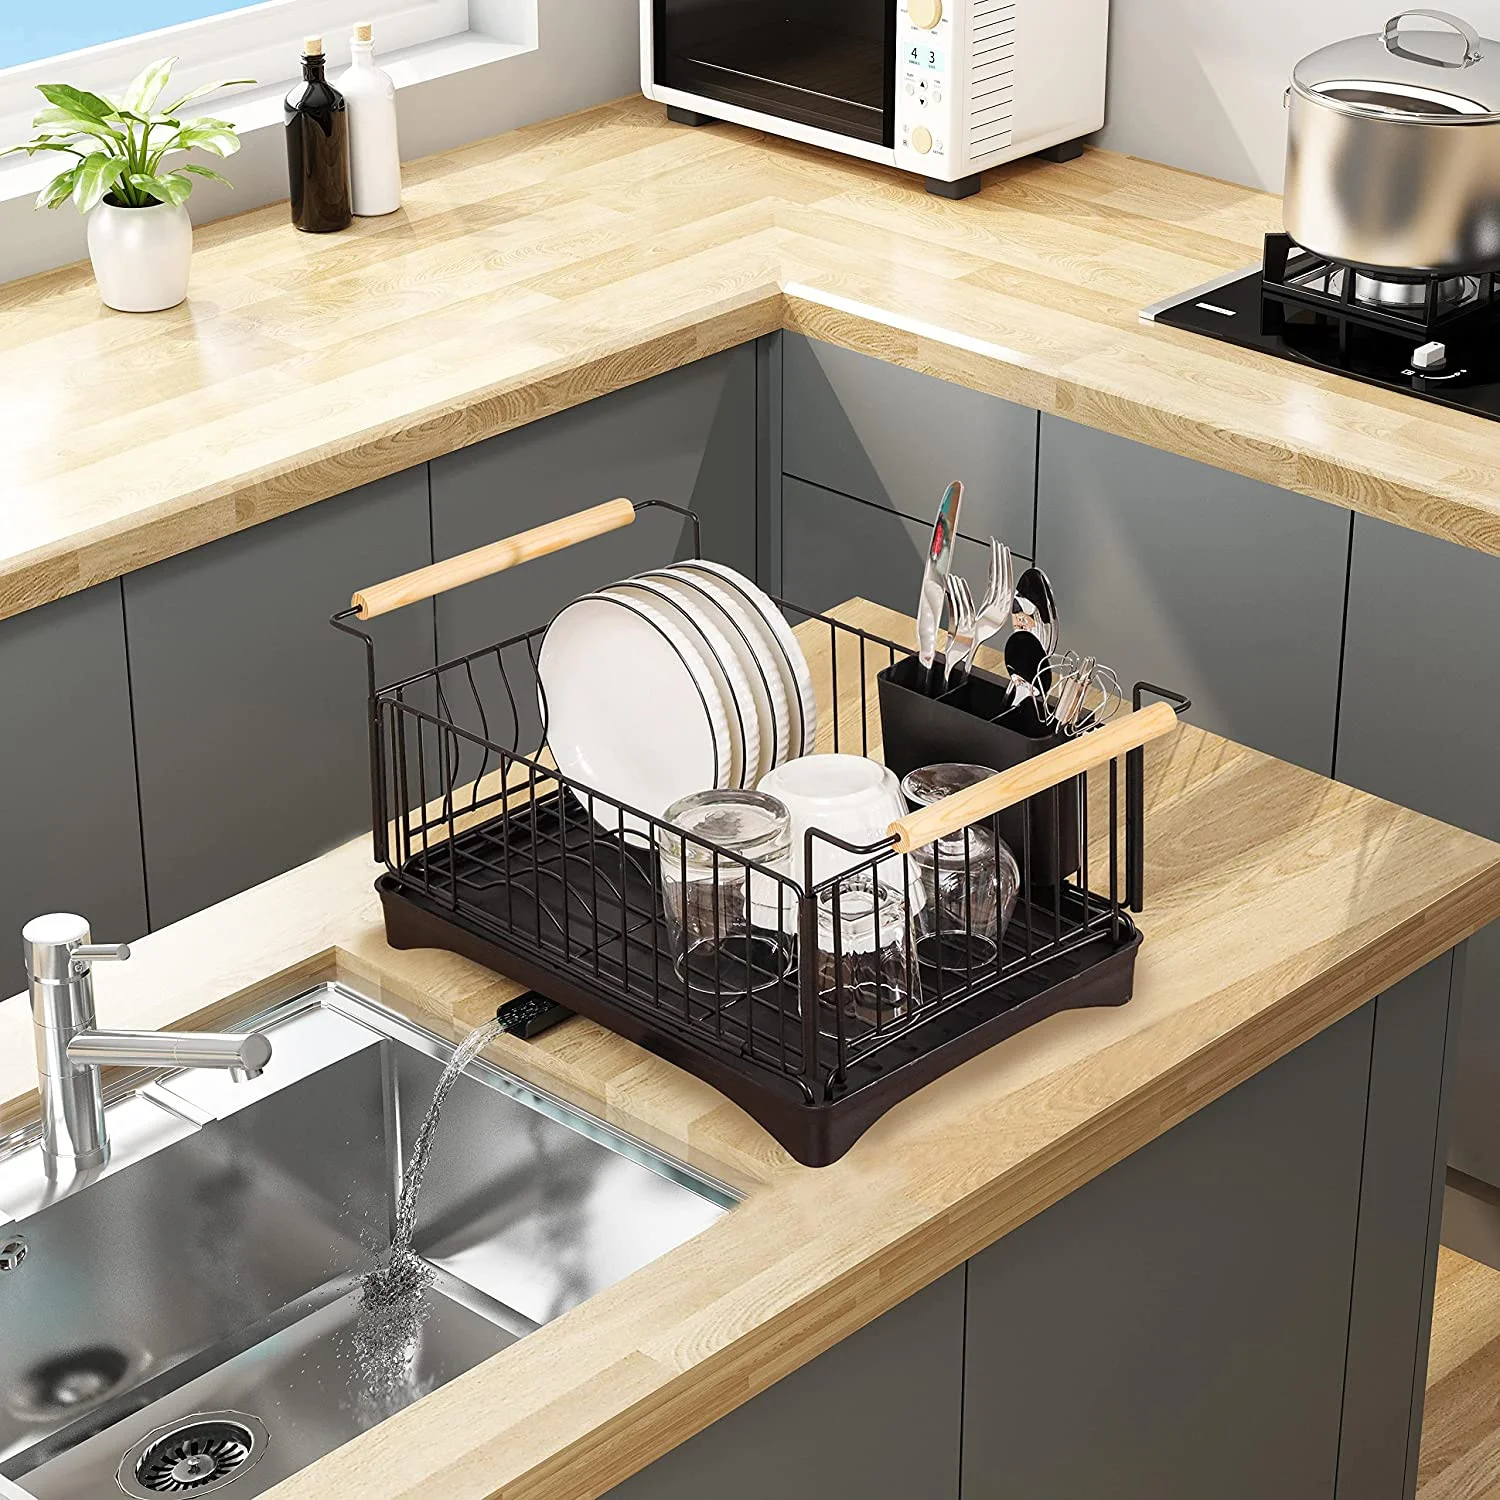 DISH DRYING RACK, WITH DISH DRAIN TRAY PIPE, KITCHEN SINK